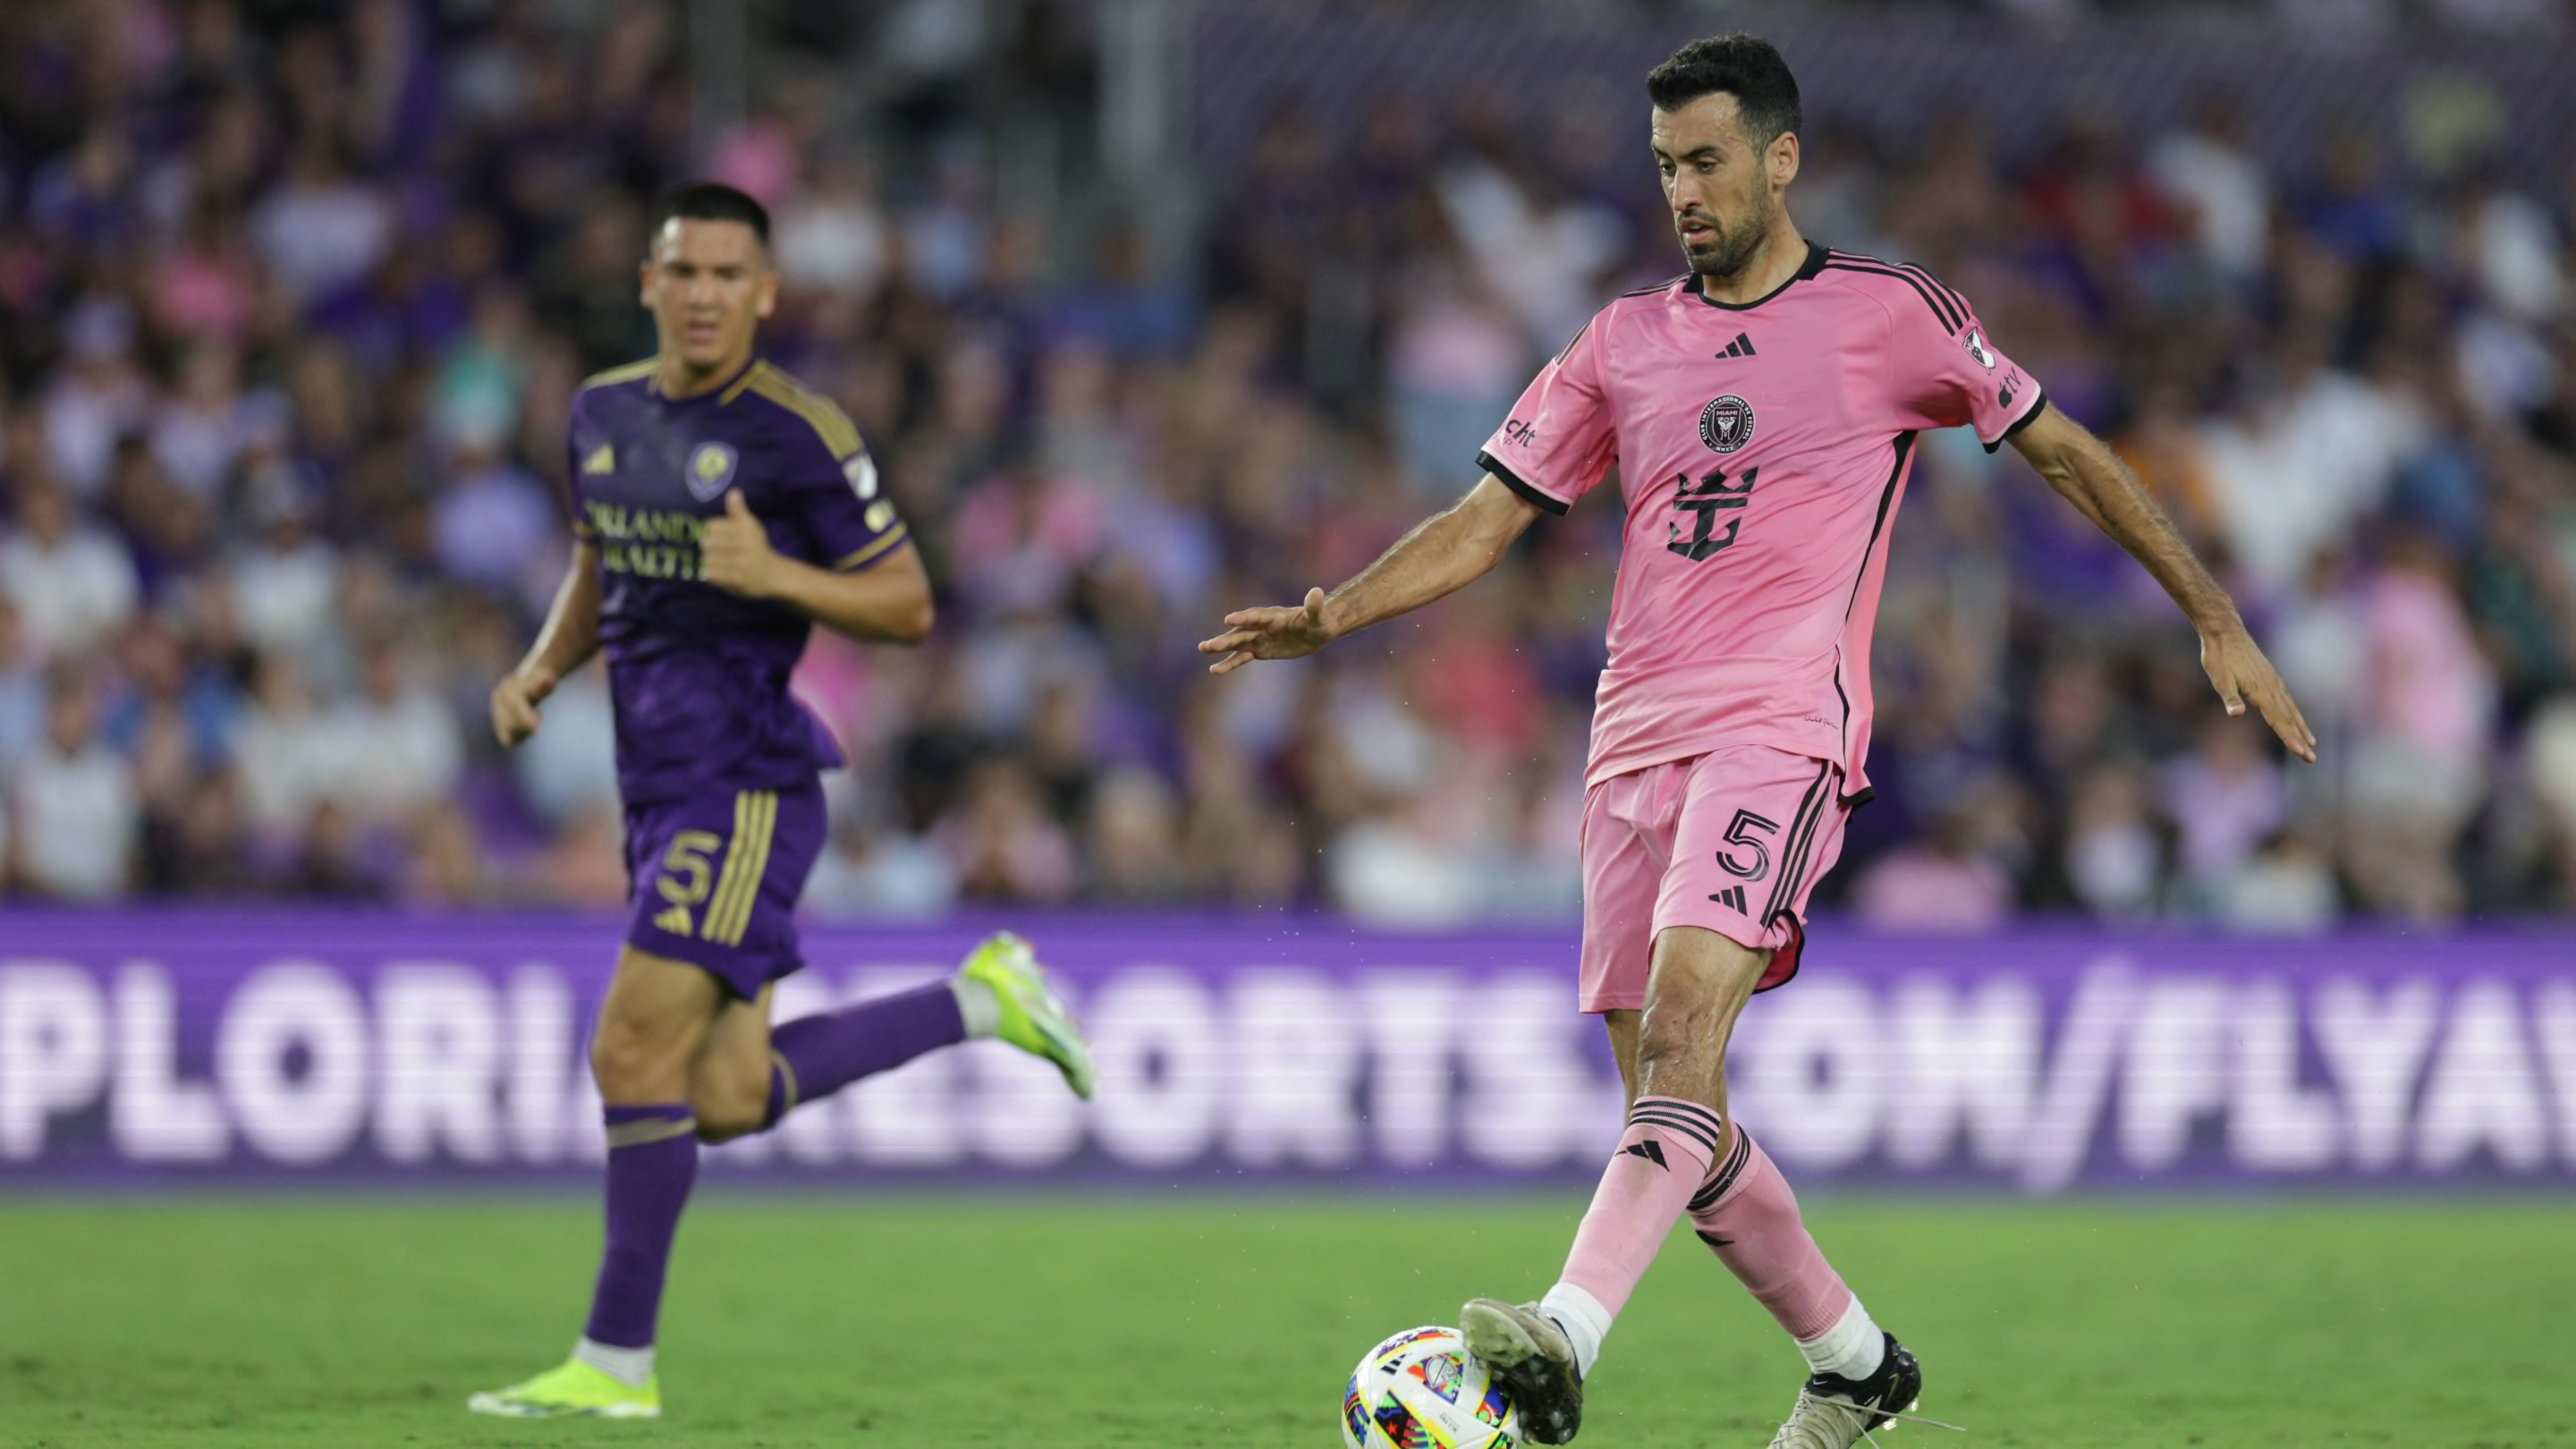 Three takeaways from Inter Miami's 0-0 draw against Orlando City